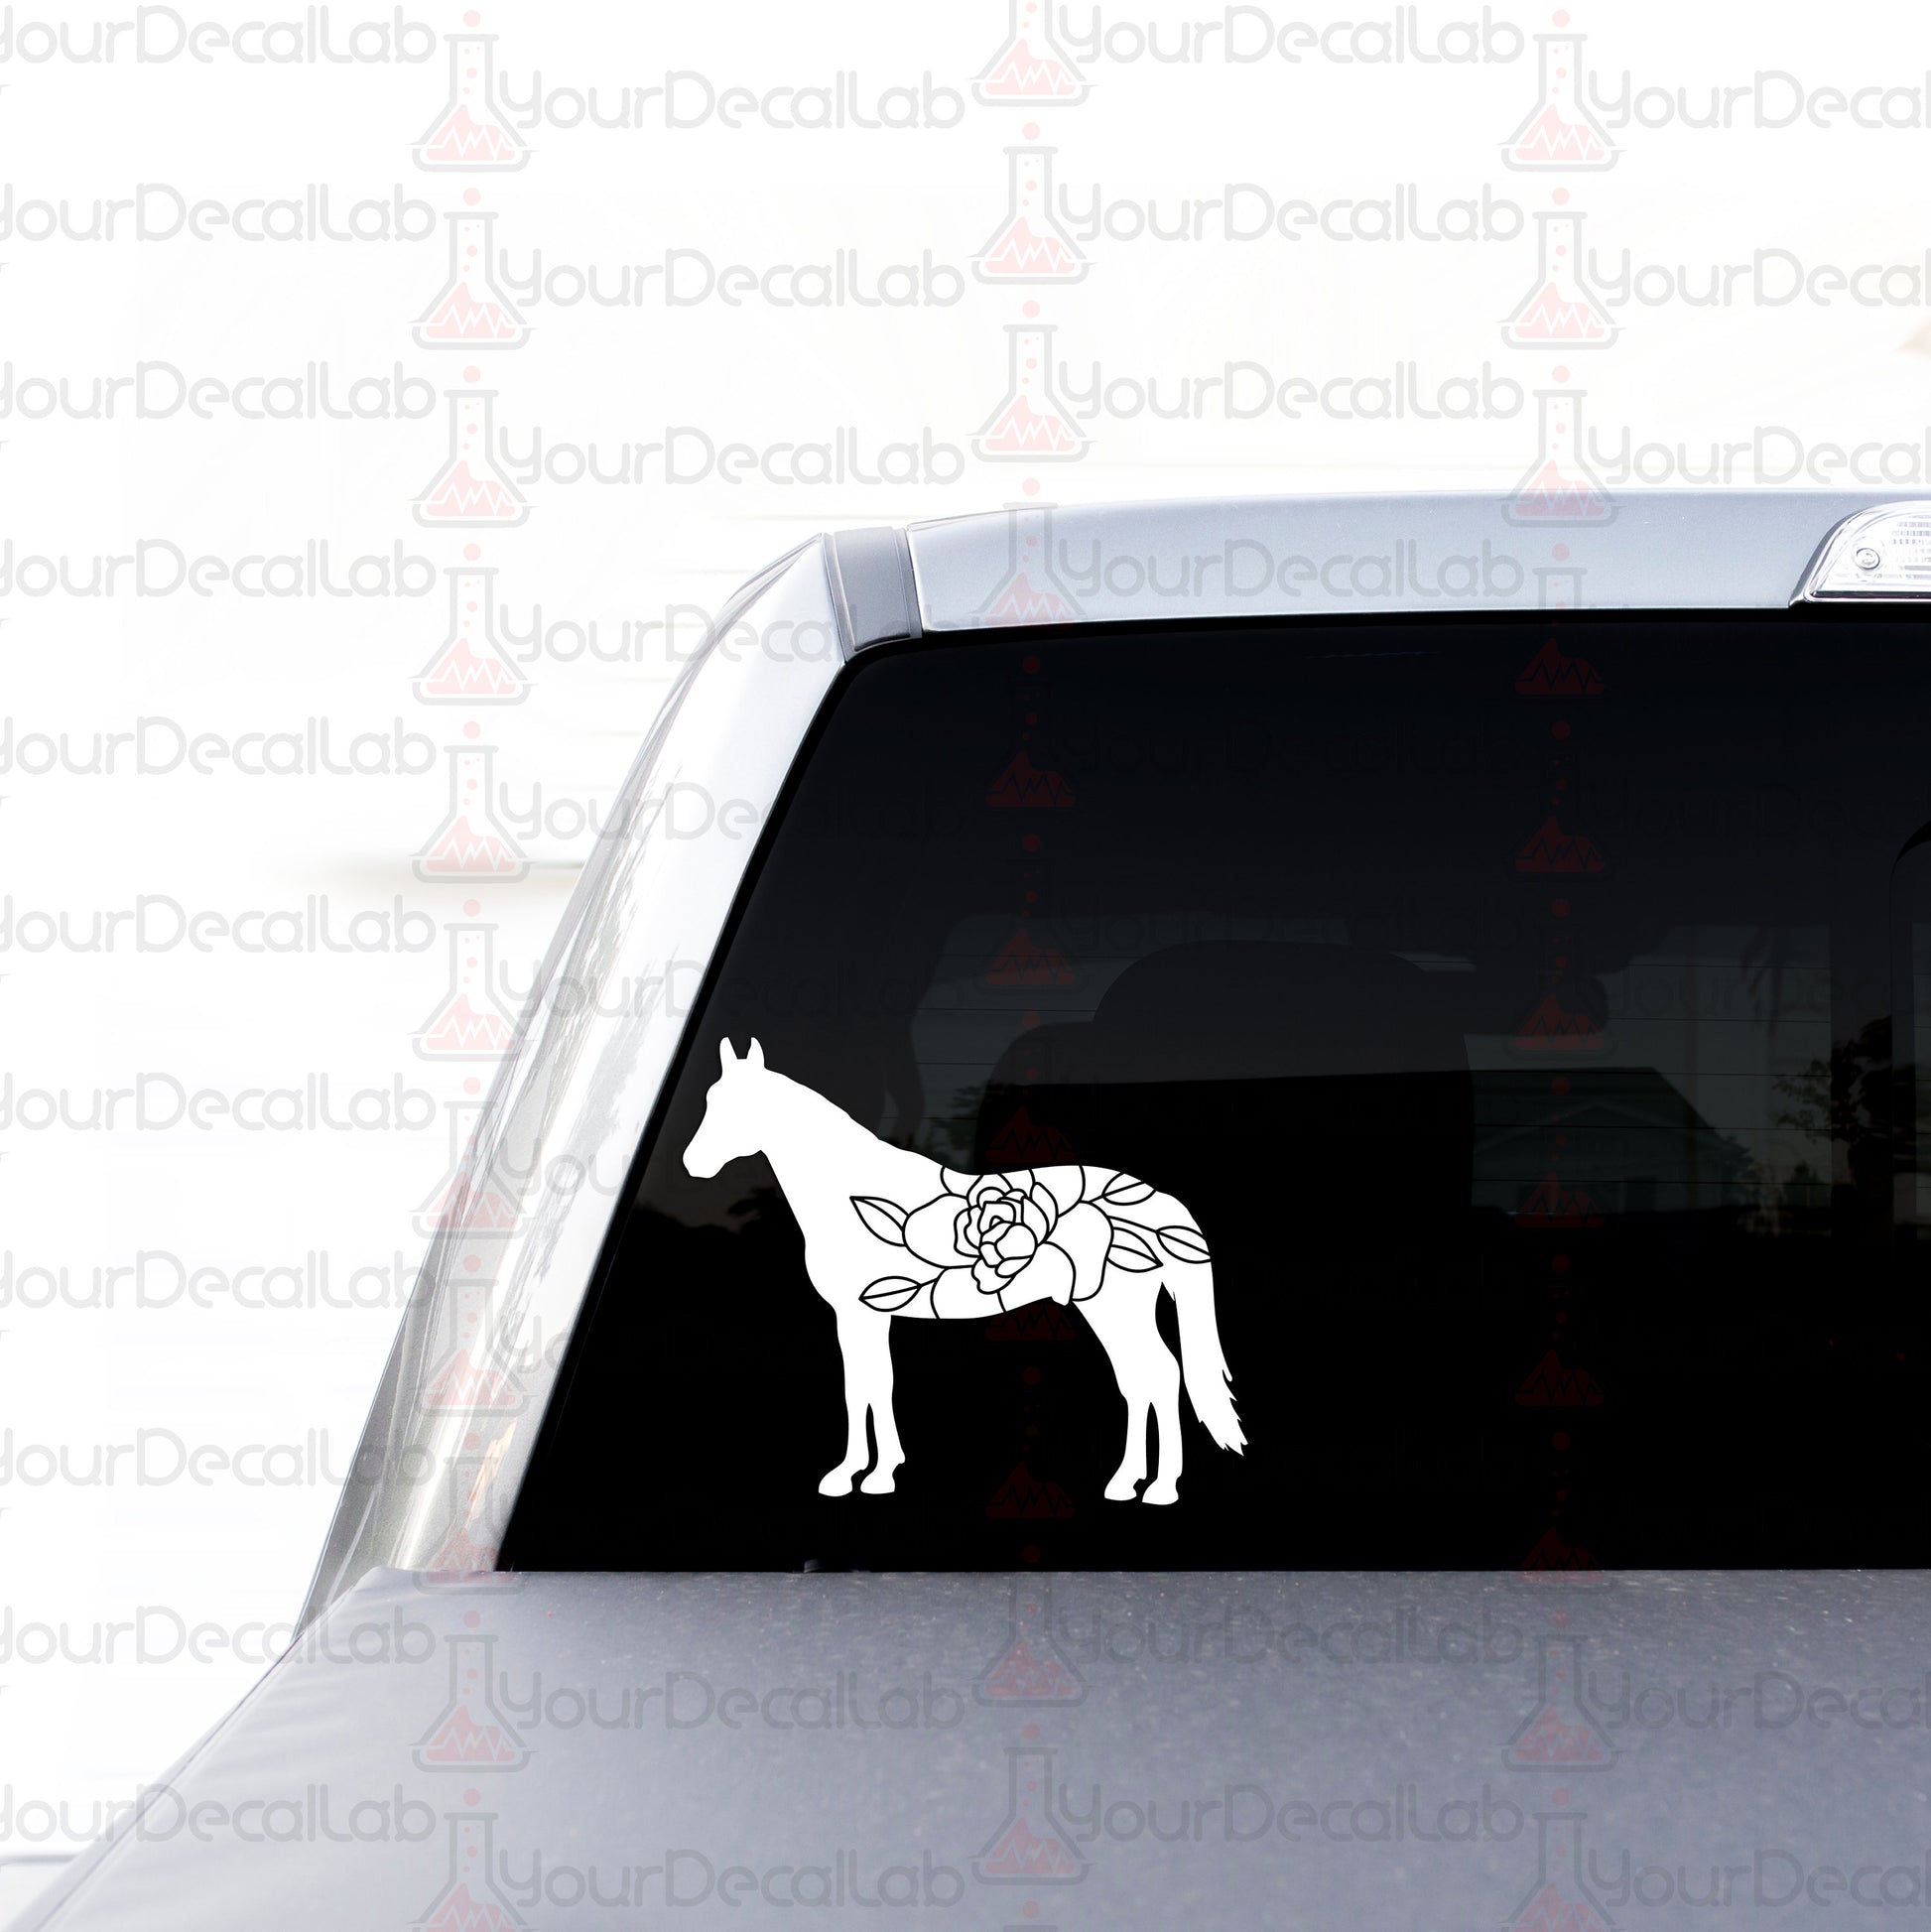 a sticker of a horse with a rose on it